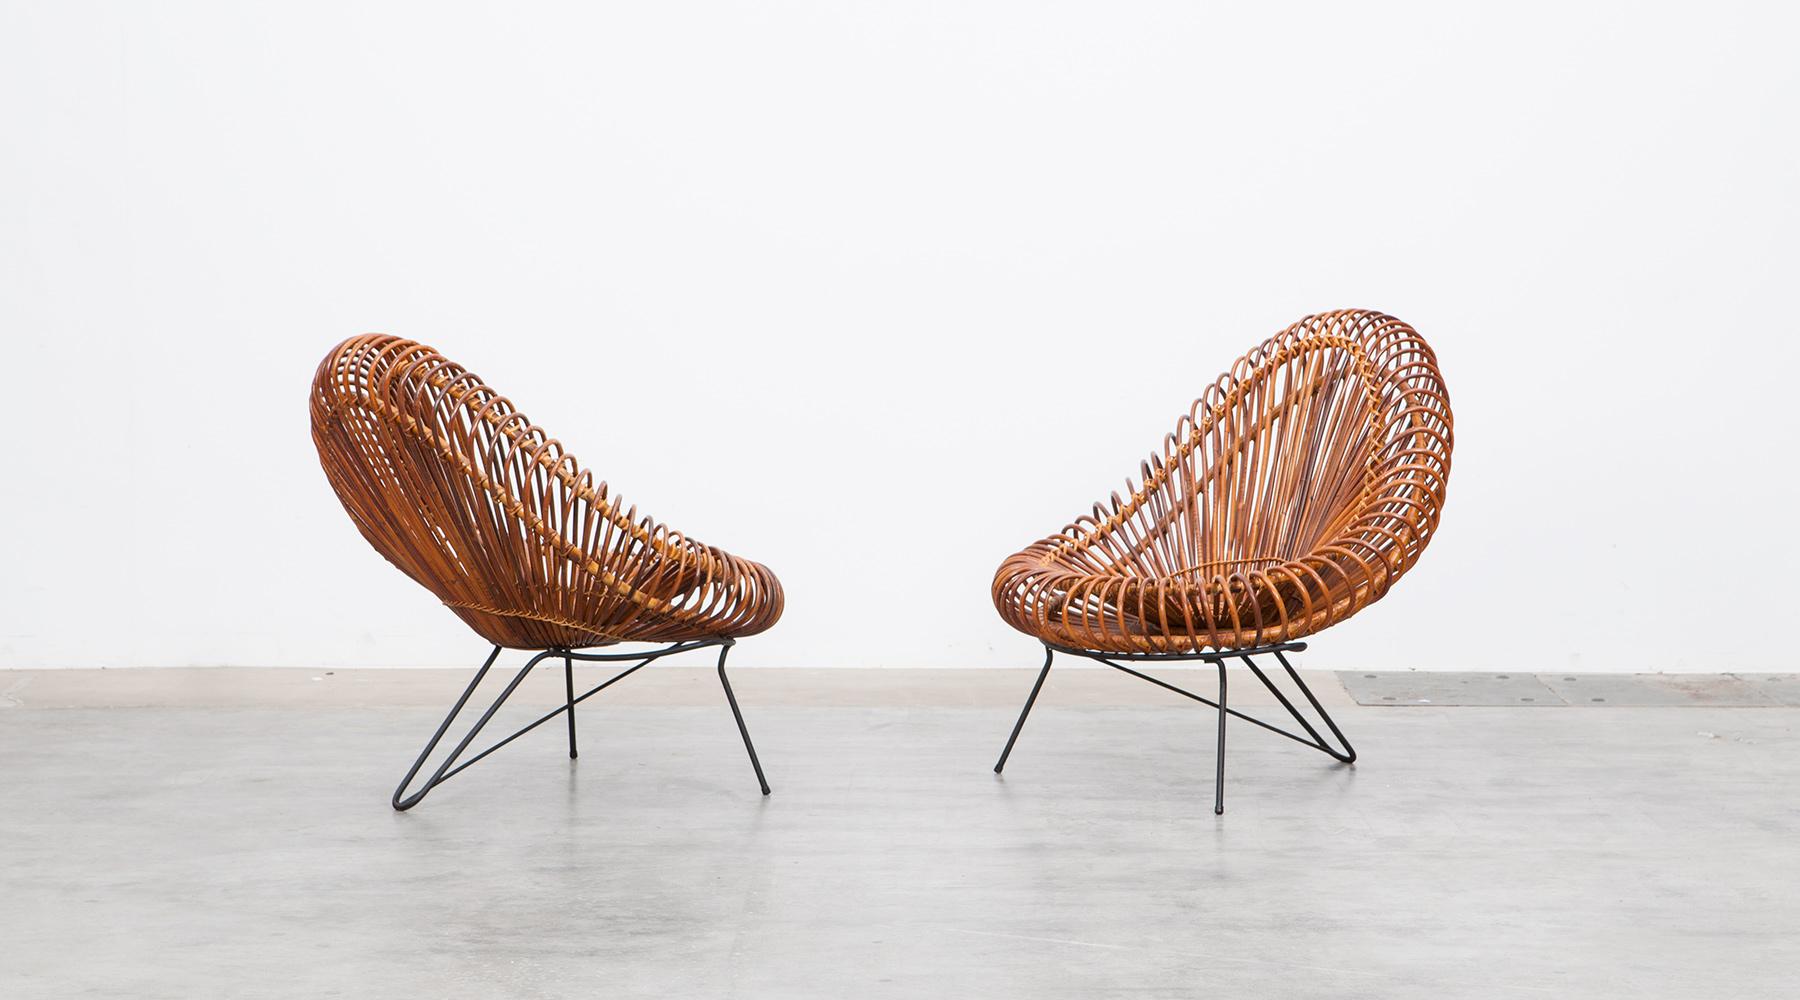 Basket lounge chairs by Janine Abraham and Dirk Jan Rol, France, 1950.

This basketware lounge chairs from 1955 is in excellent original condition, designed by Janine Abraham and Dirk Jan Rol. The elegant basket seat shell is held by black